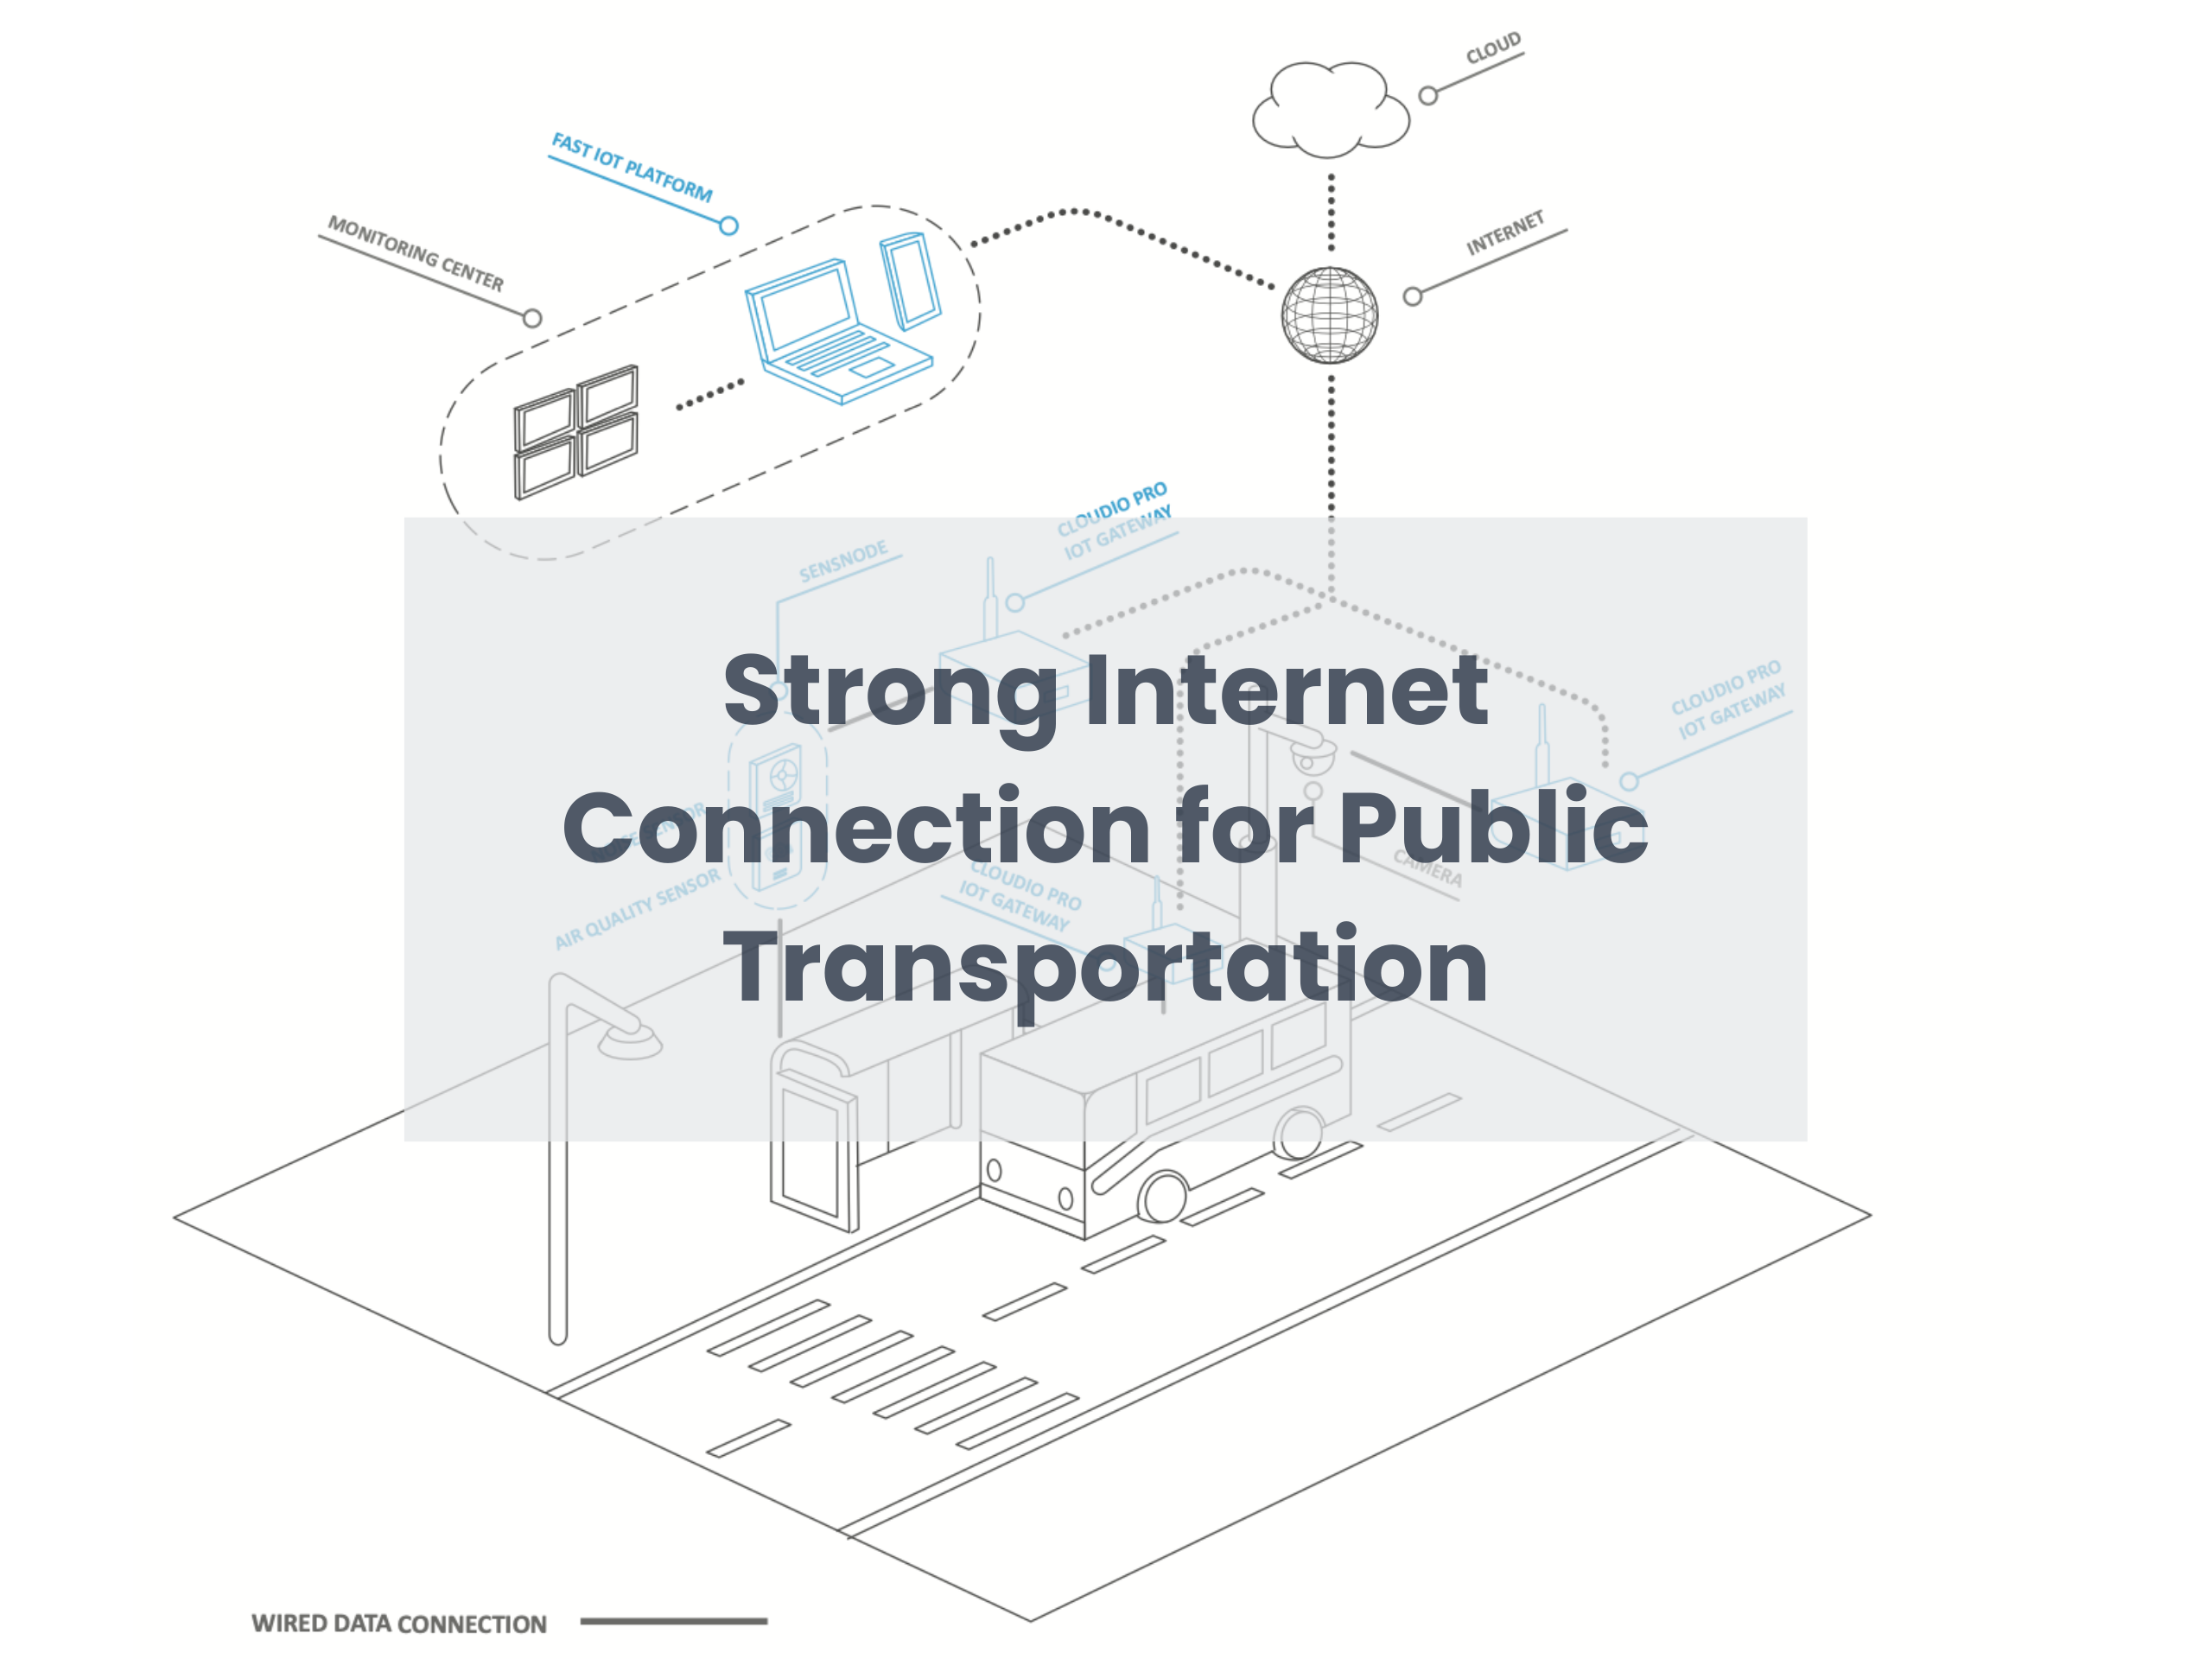 Strong Internet Connection for Public Transportation